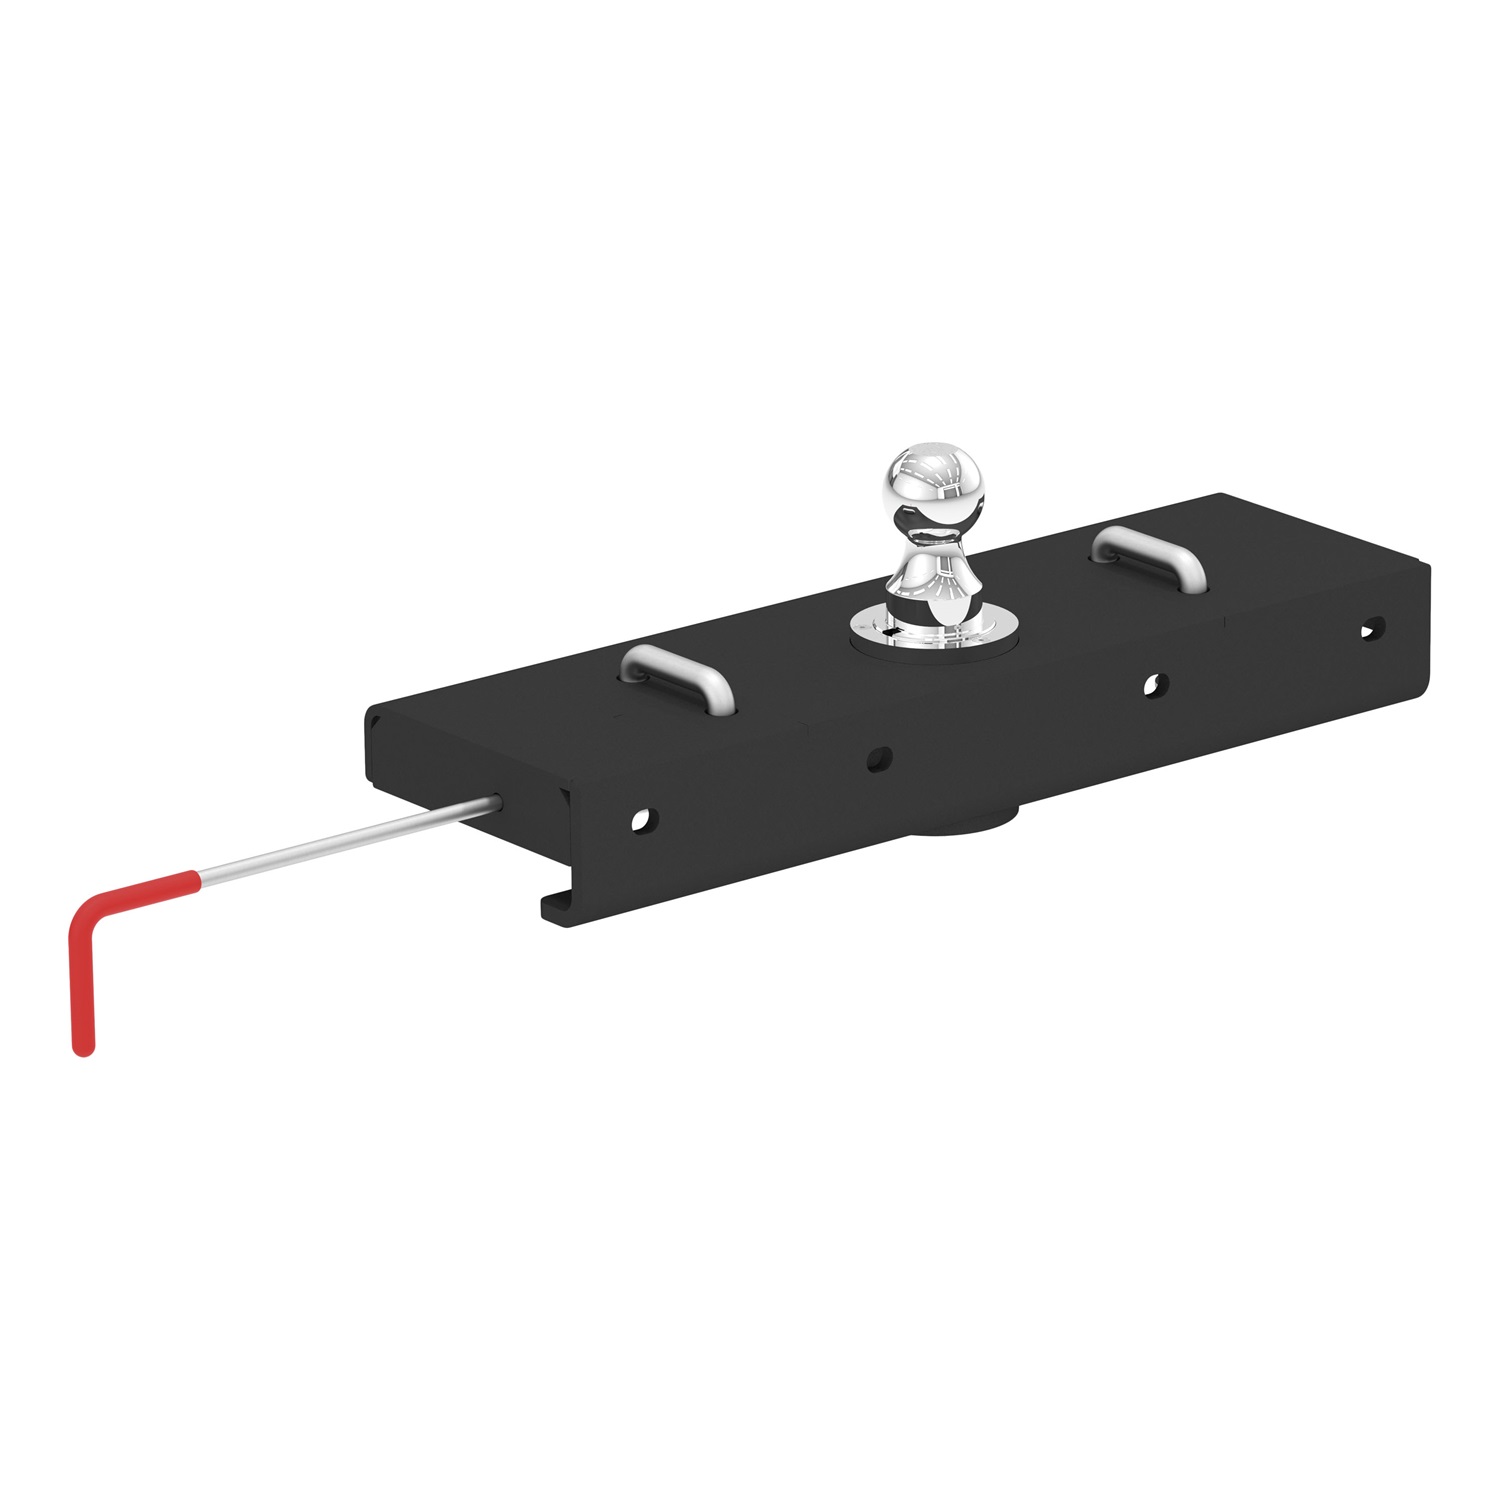 CURT Manufacturing CURT Manufacturing 60611 Under-Bed Double Lock; Gooseneck Hitch